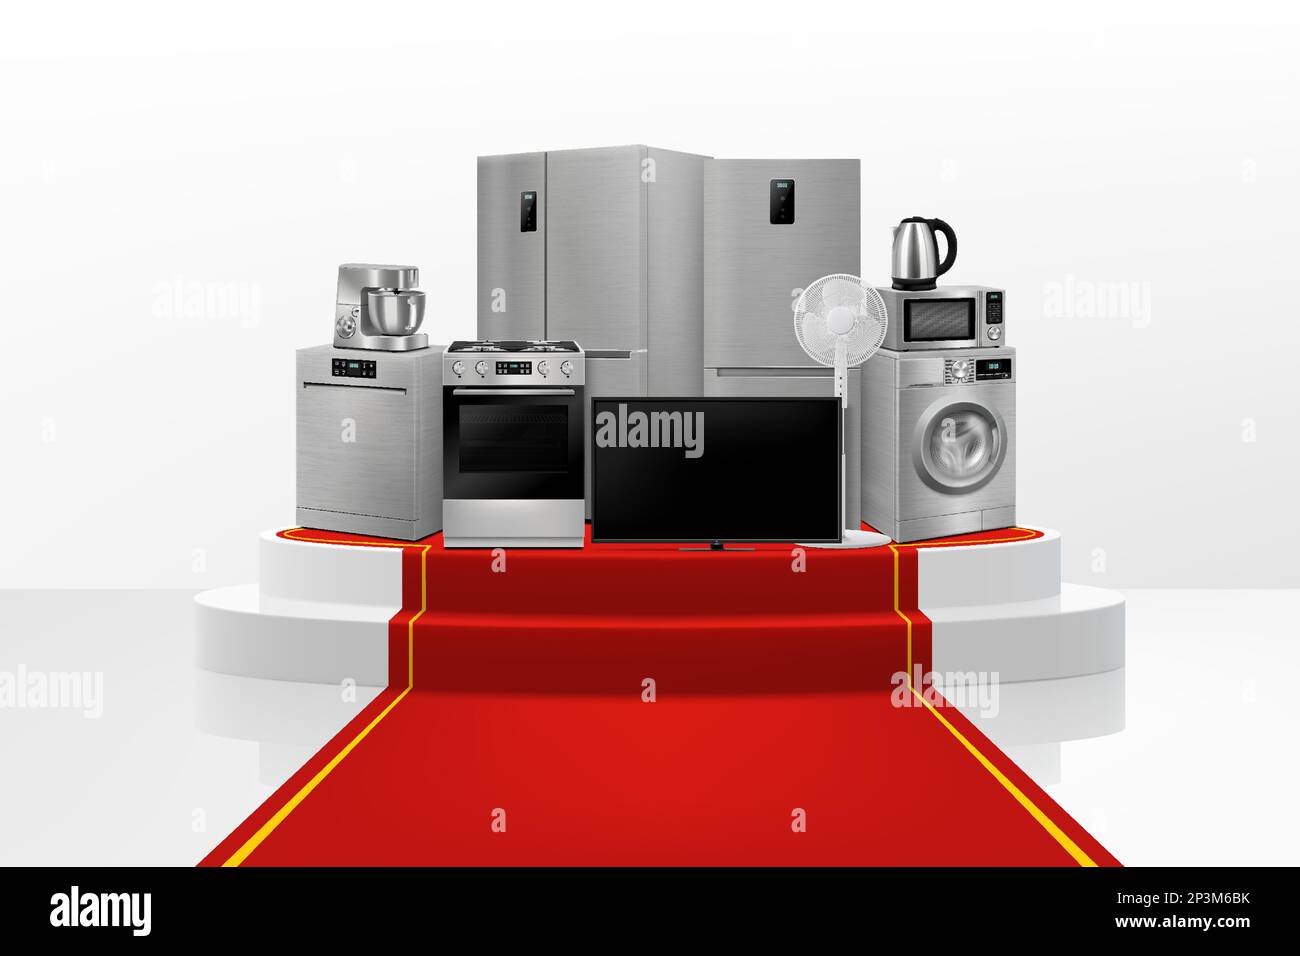 Show Podium or Pedestal with red path and household appliances: microwave oven, washing machine, refrigerator, stove, ,TV, dishwasher, kitchen hood. R Stock Vector